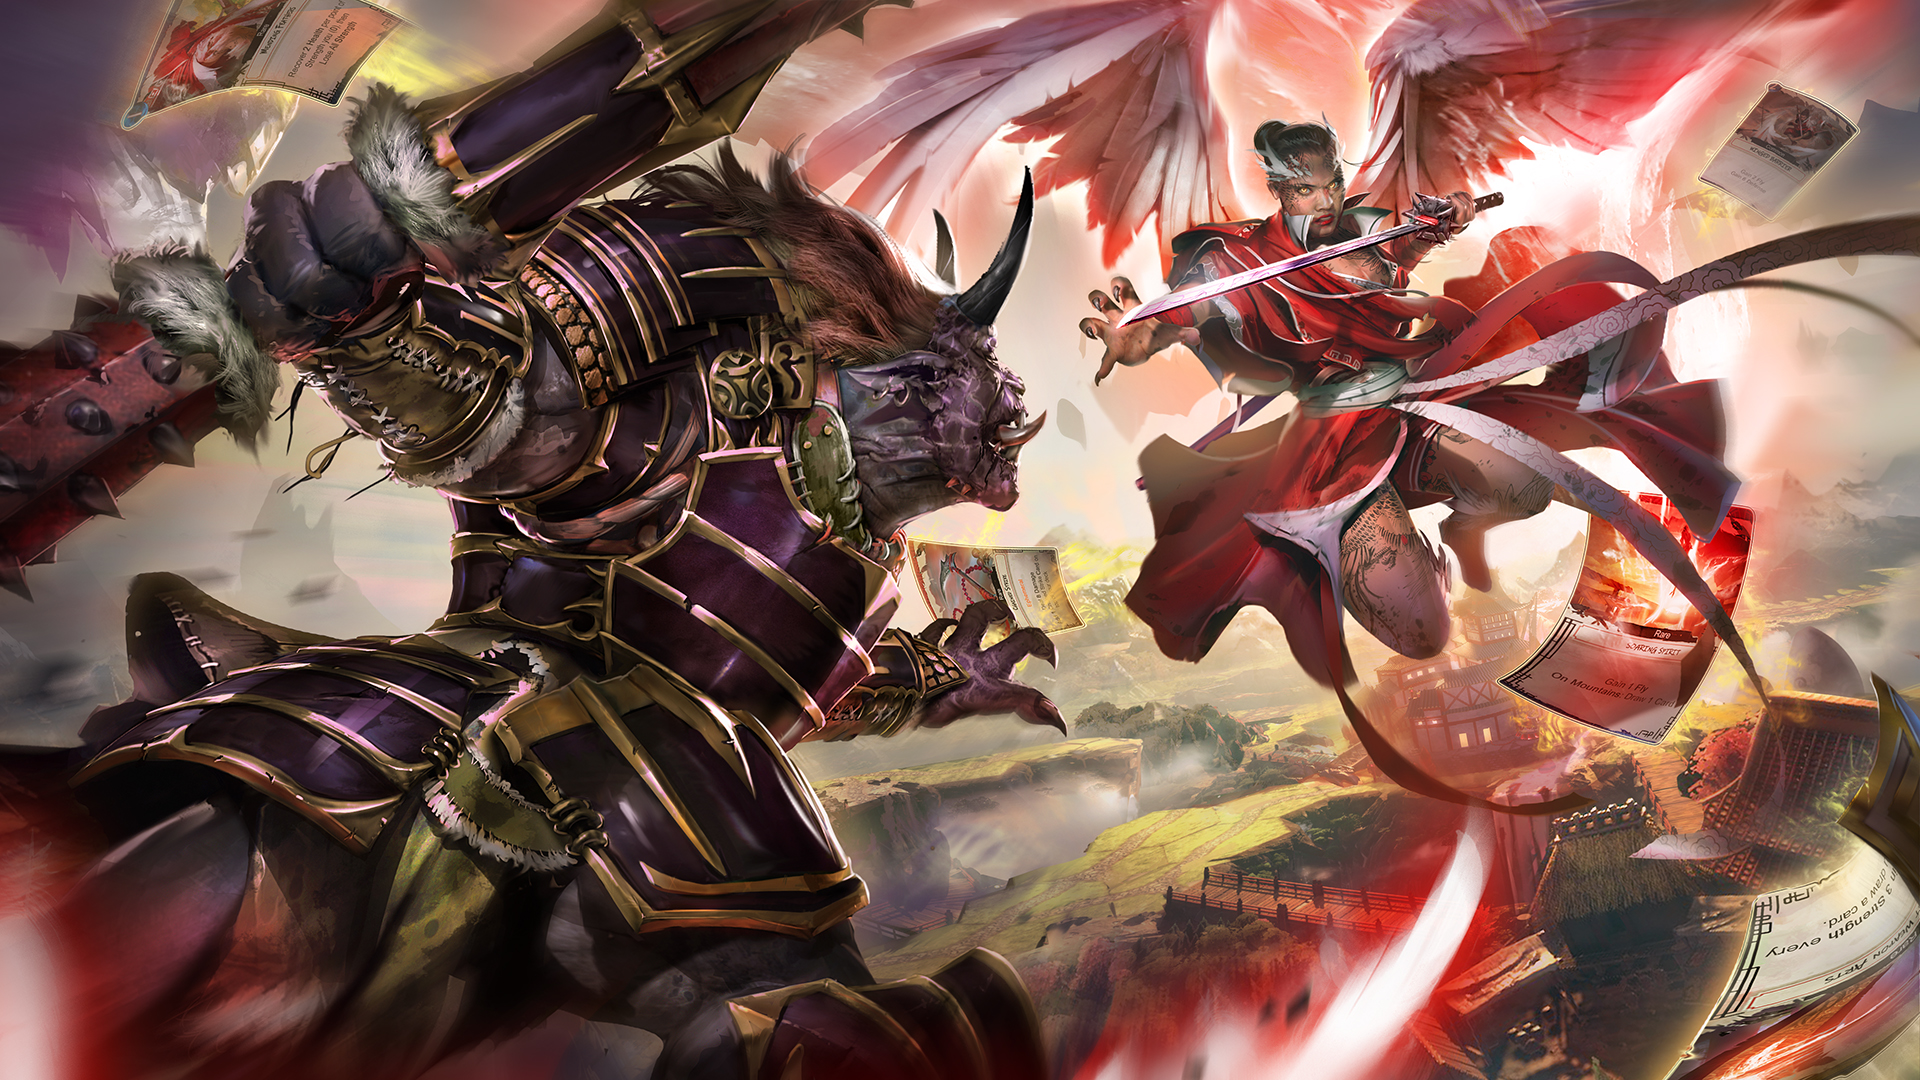 The key art for Mahokenshi features a samurai fighting a demon, with cards flying about.